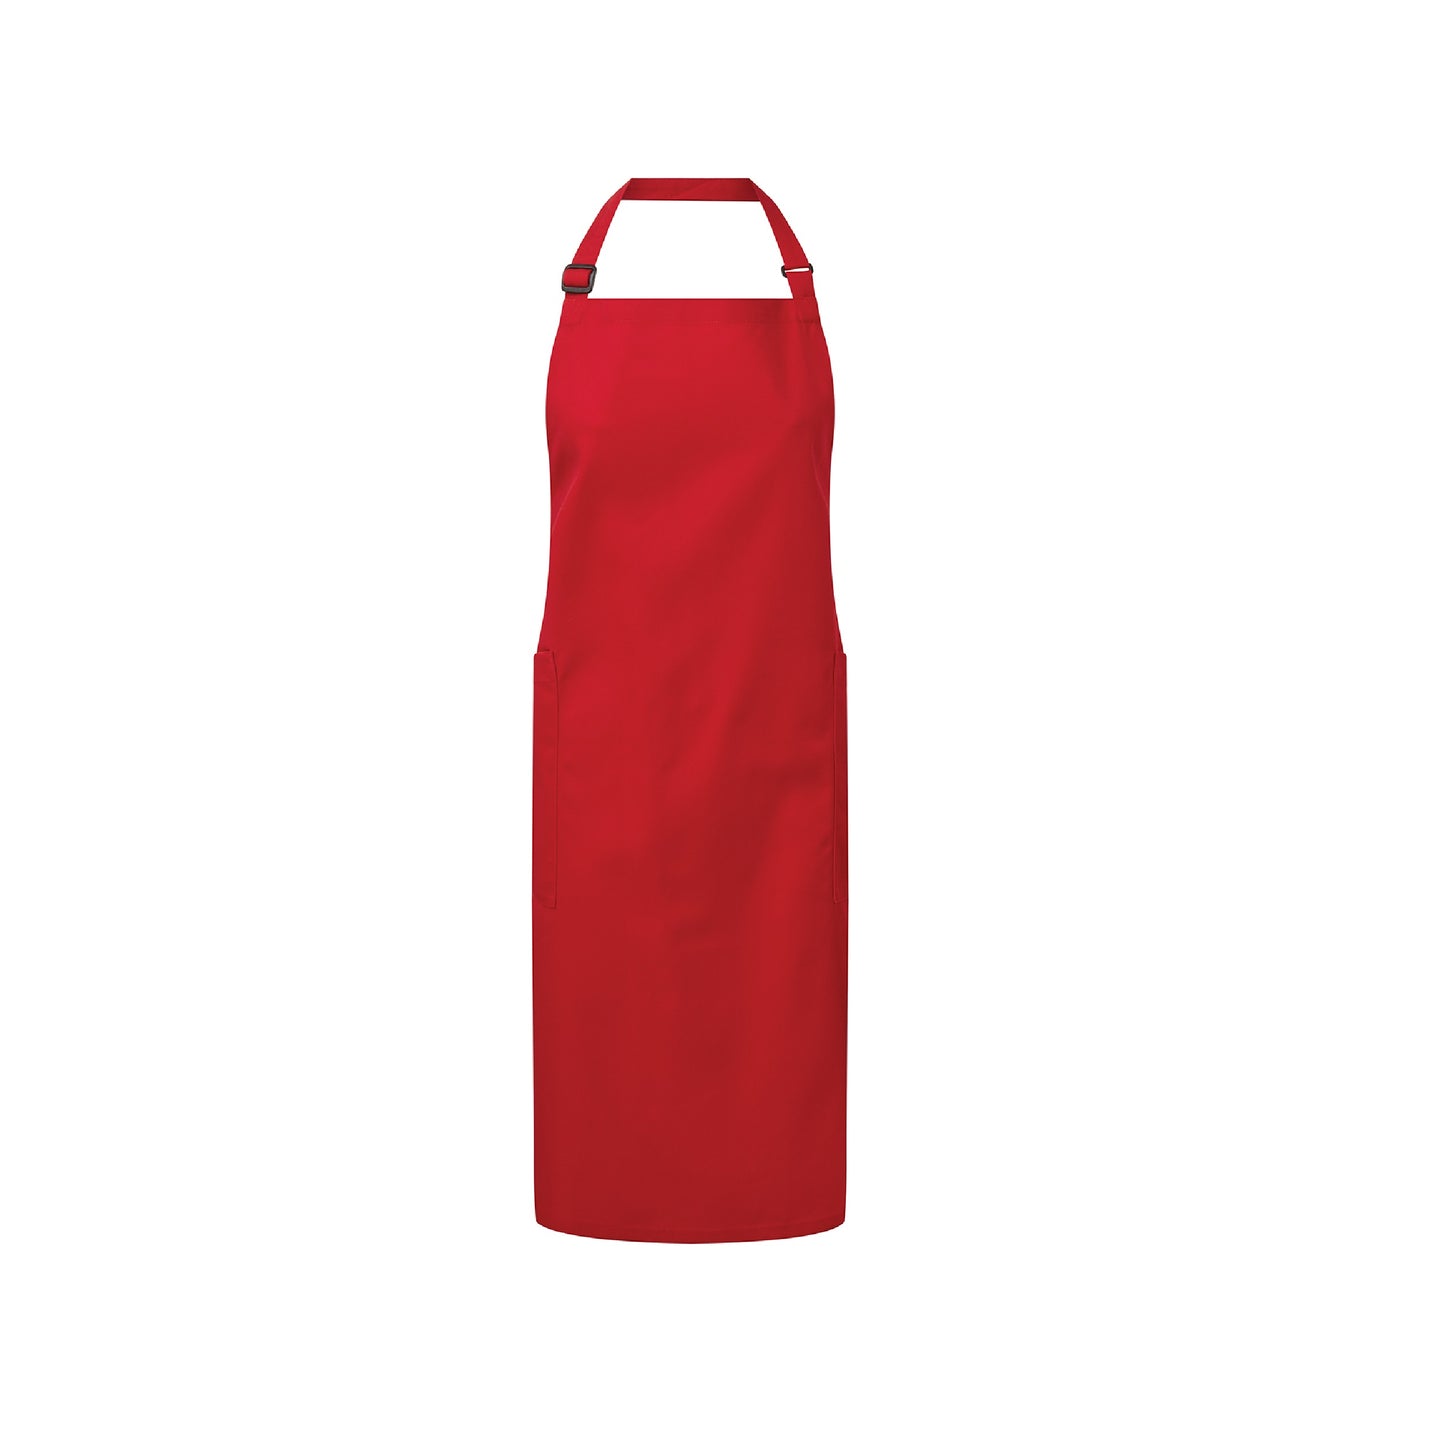 Recycled Polyester Apron and Cotton Bid Apron